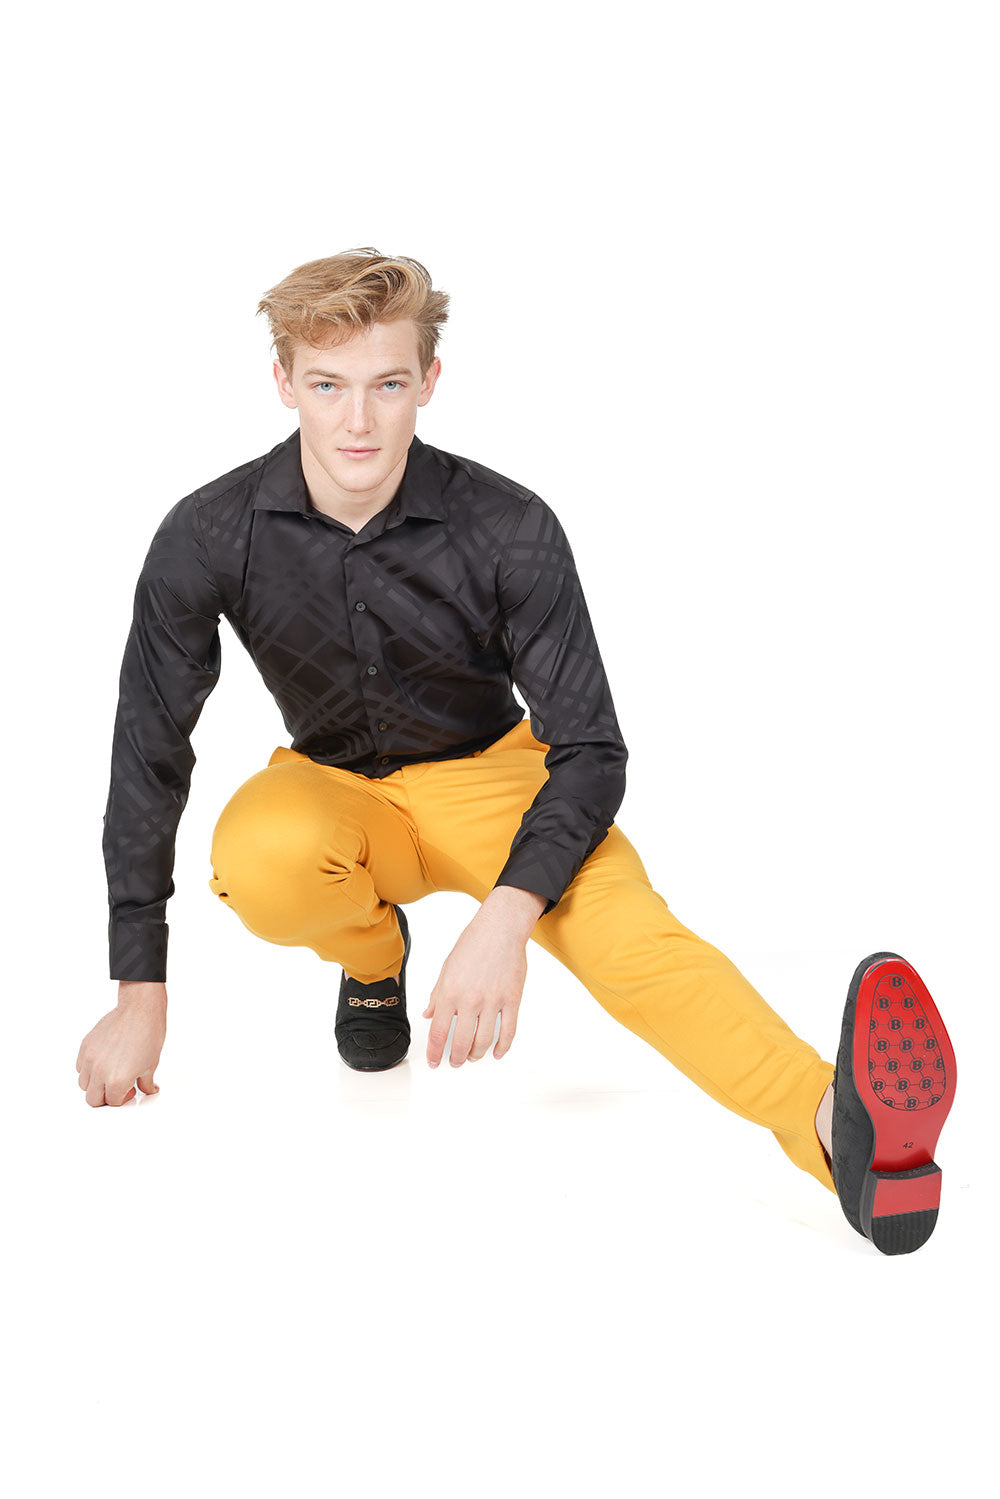 Barabas Men's Solid Color Essential Chino Dress Stretch Pants CP4007 Mustard